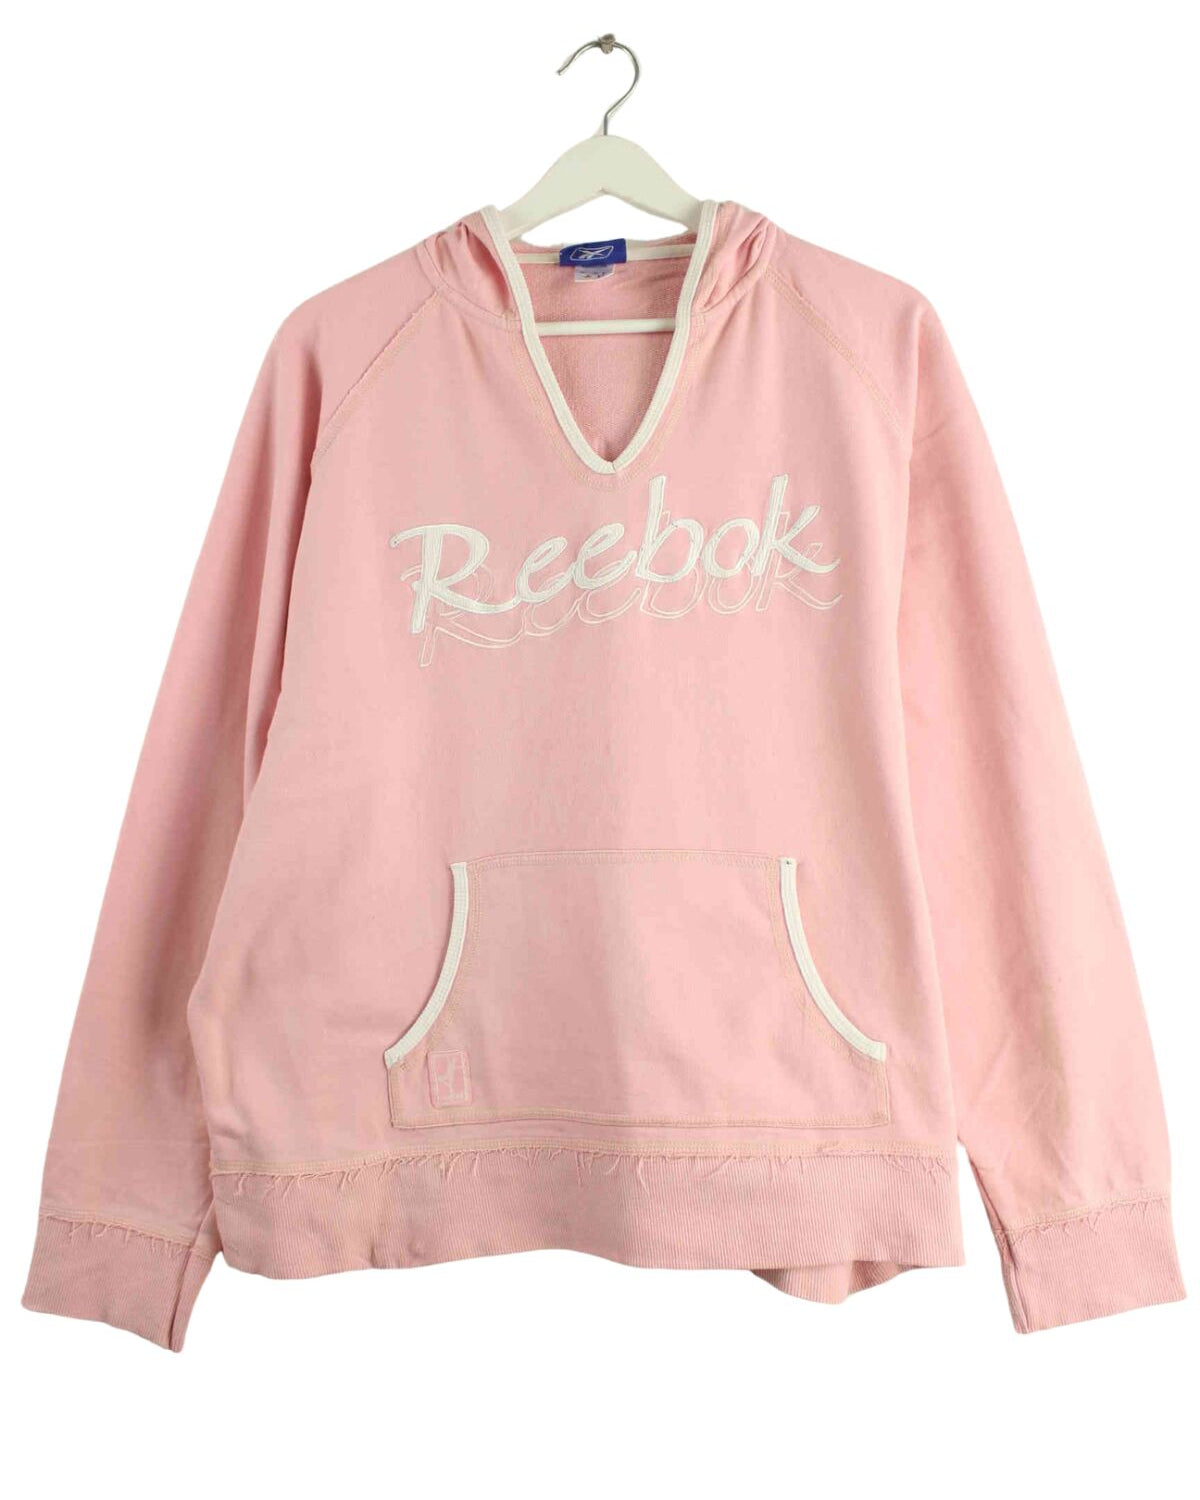 Reebok Damen Embroidered Hoodie Rosa L (front image)